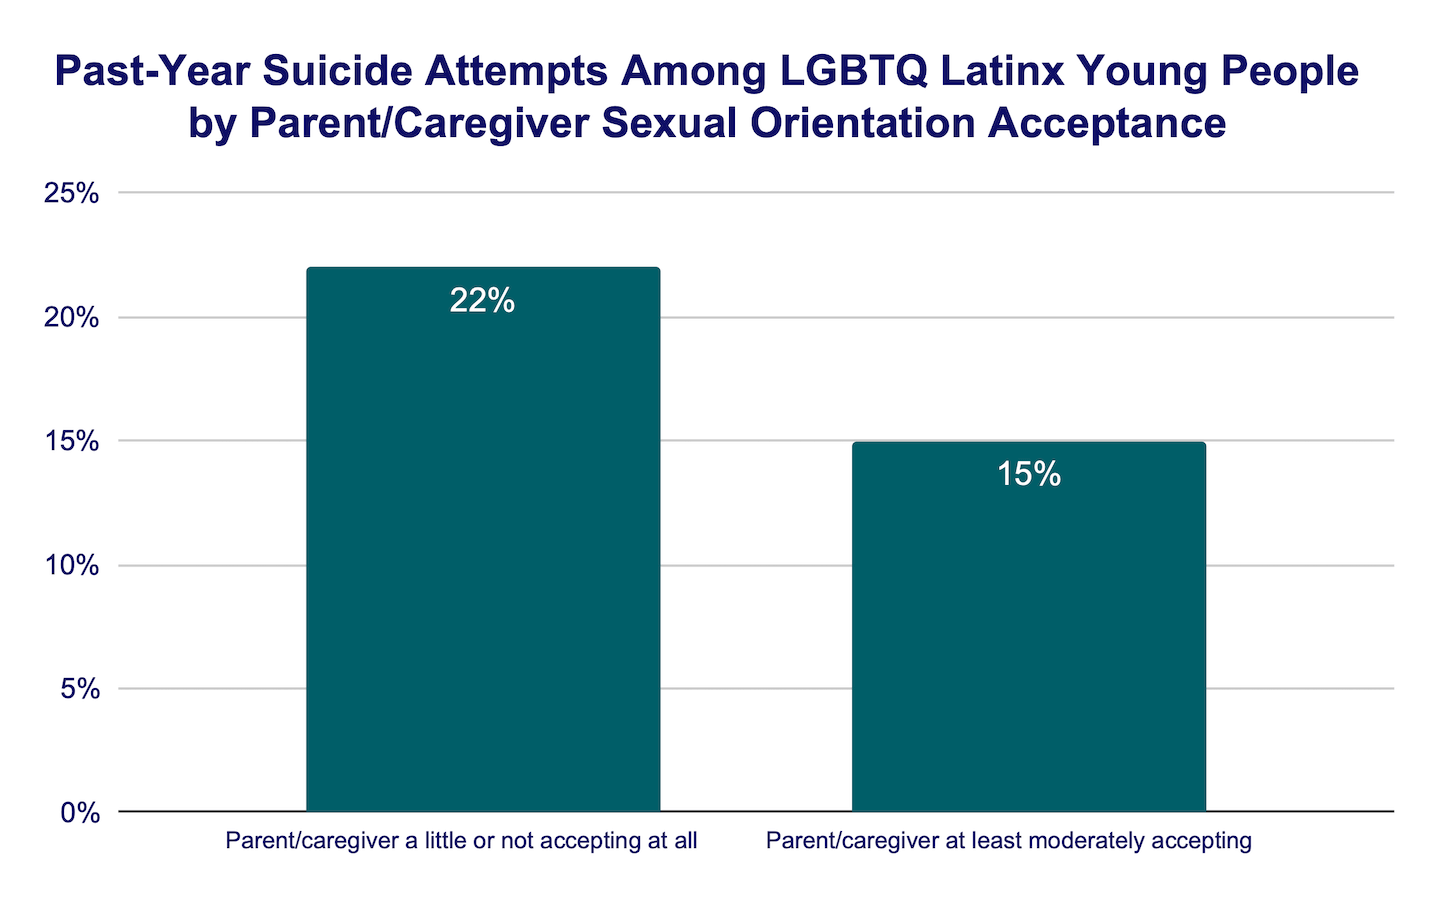 Past-year suicide attempts among LGBTQ Latinx young people by parent/caregiver sexual orientation acceptance bar graph